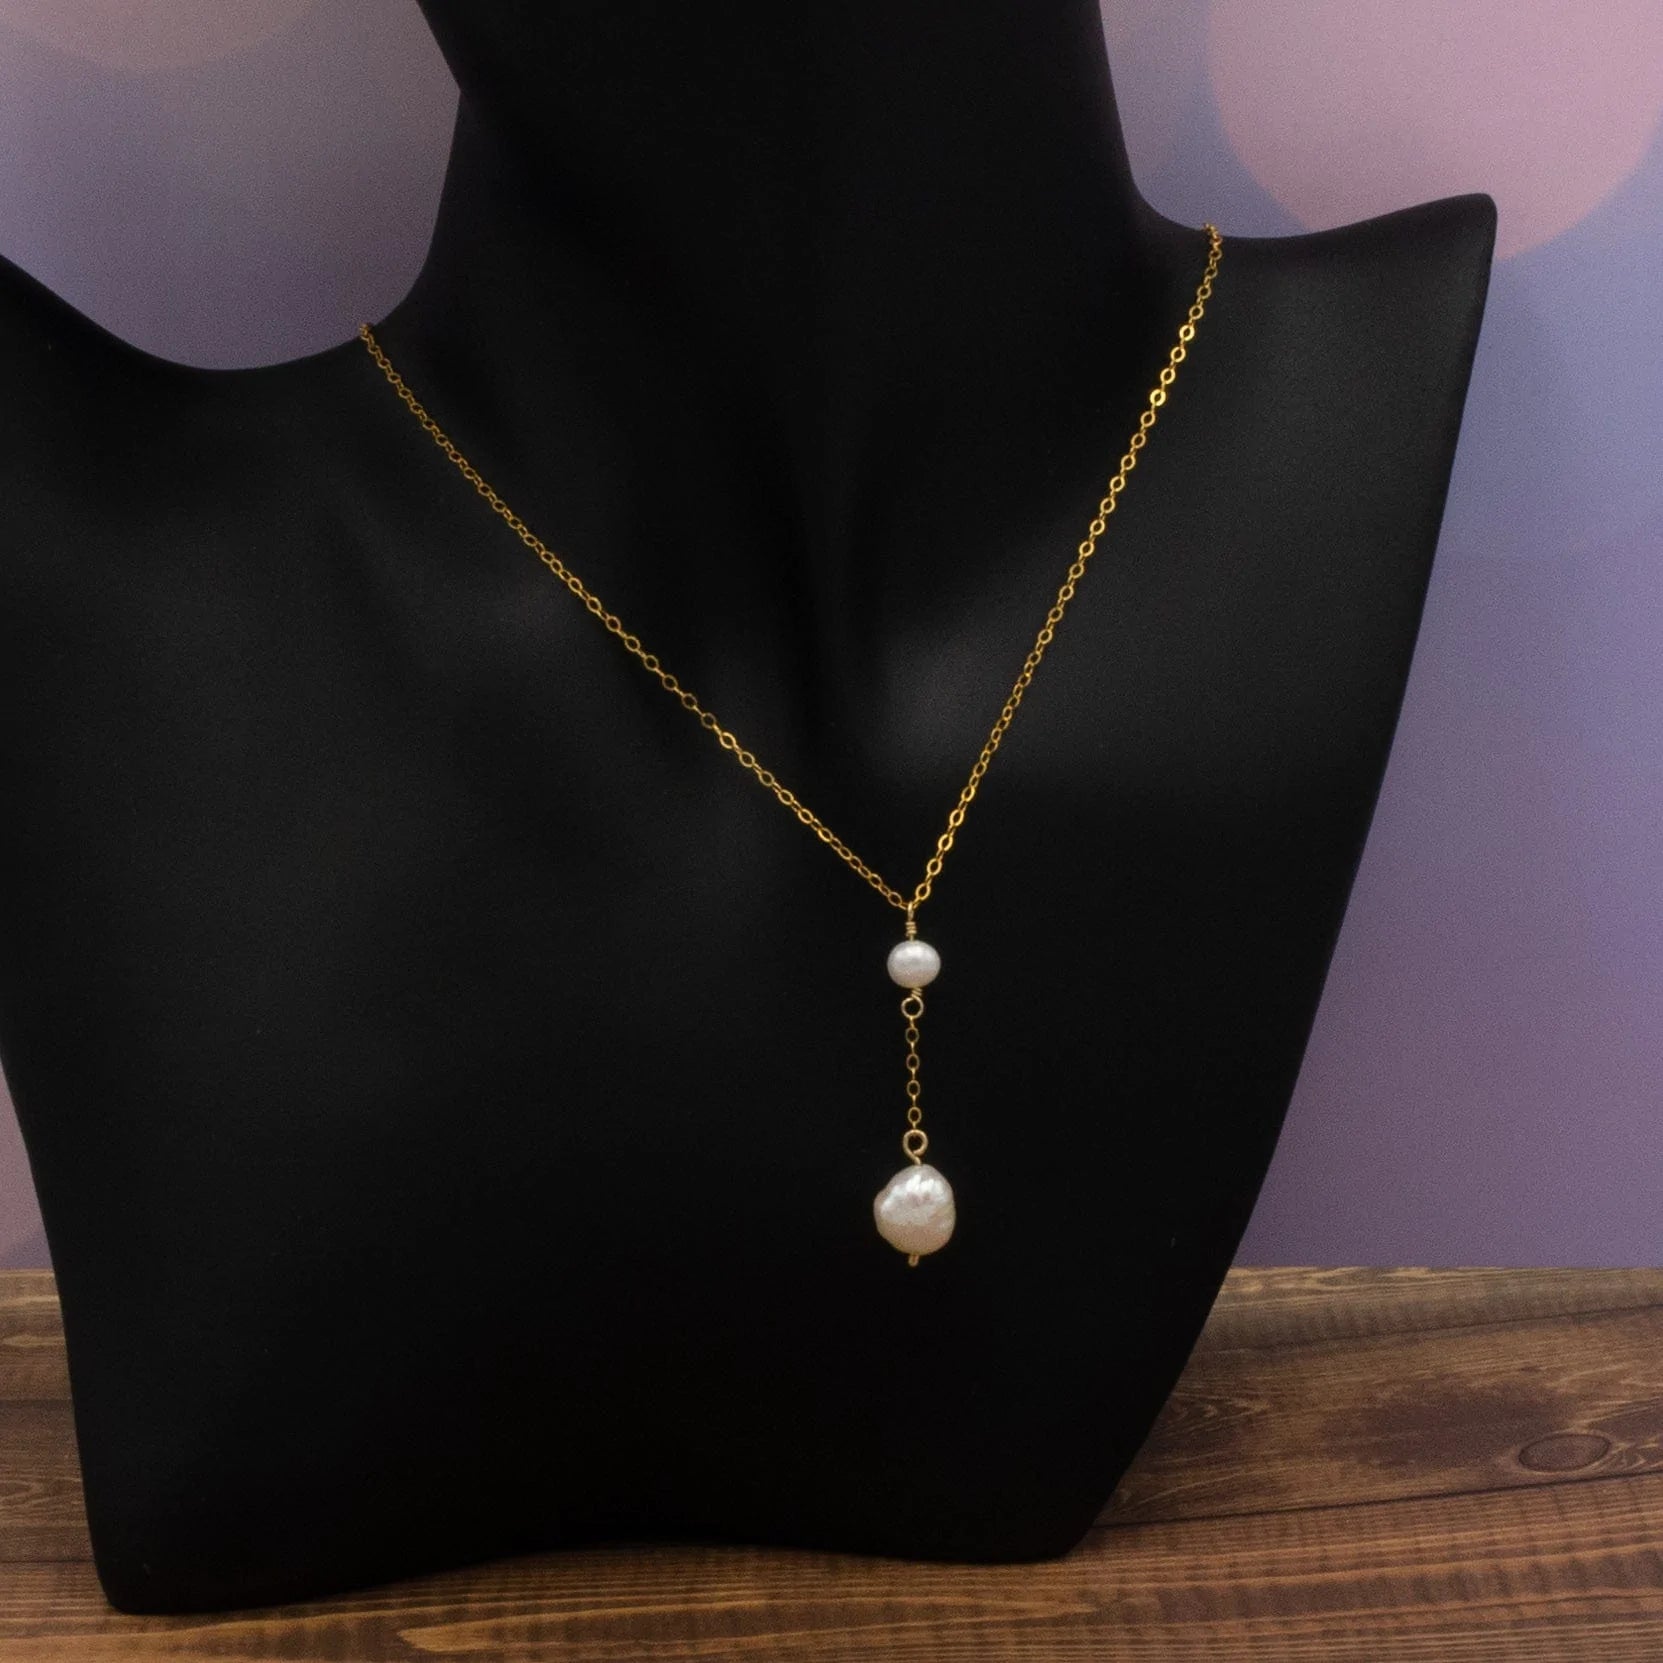 Arbor Trading Post Necklaces Handcrafted Freshwater White Pearl Dainty Gold Lariat Necklace